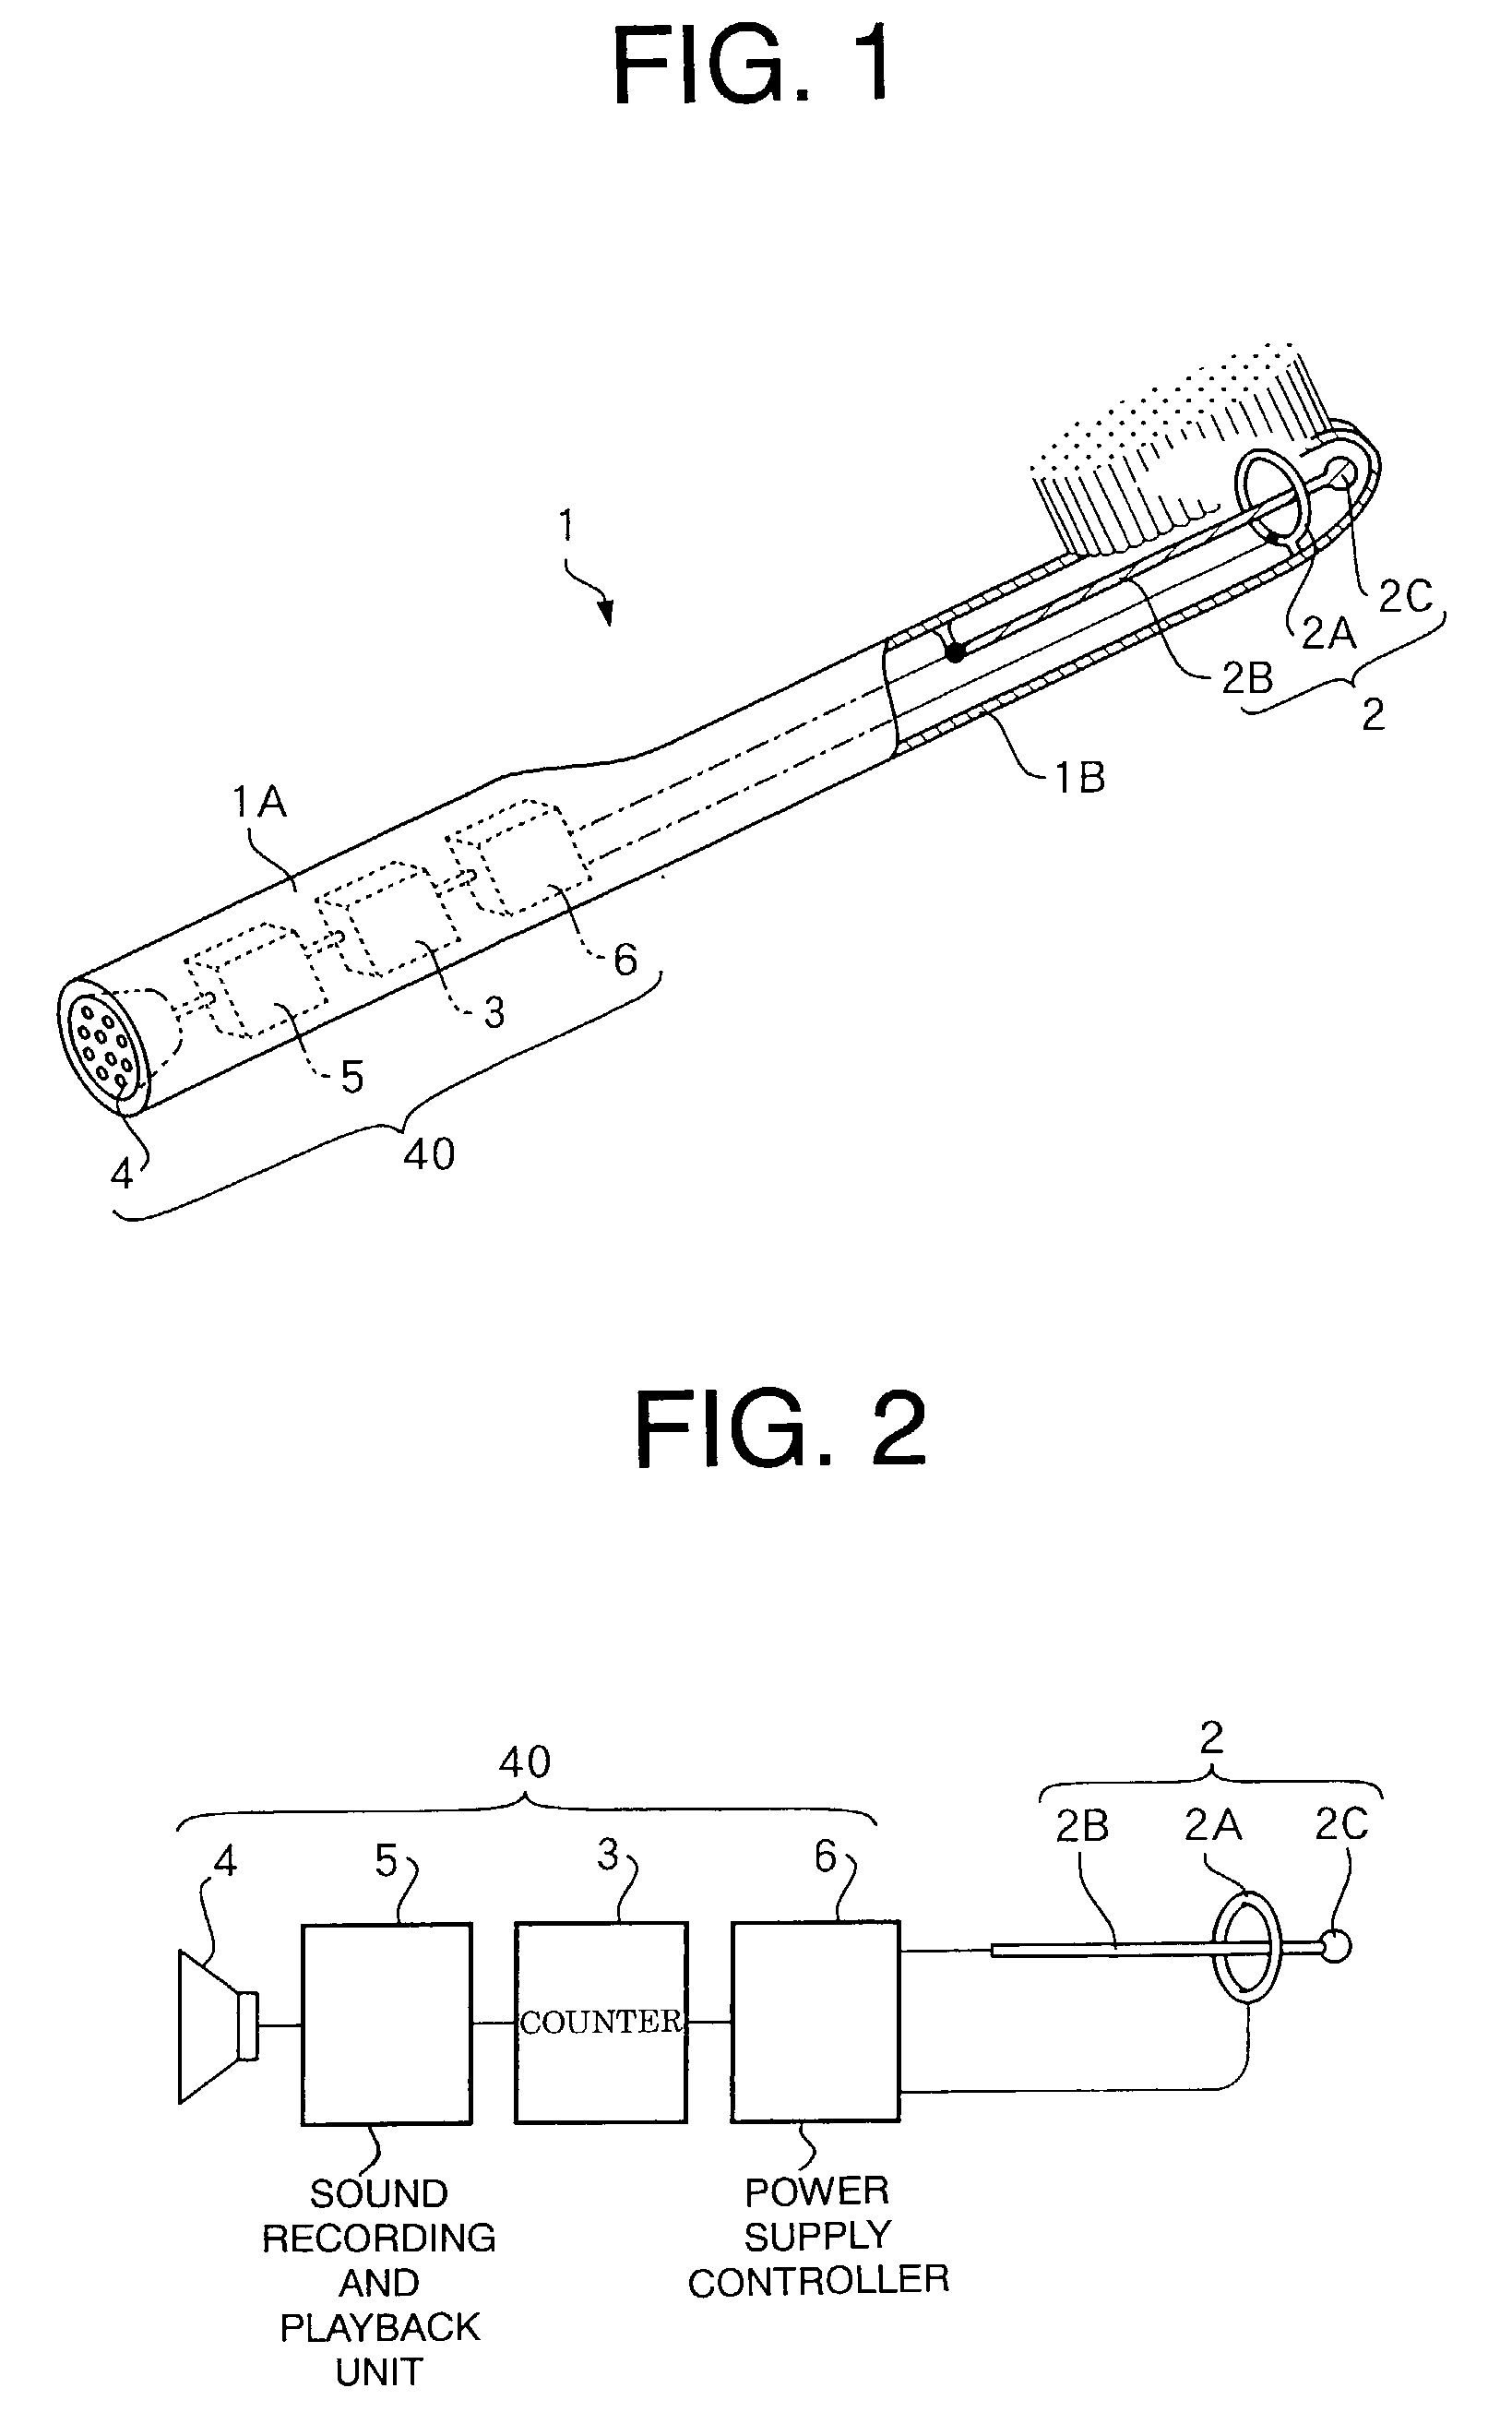 Toothbrush assembly with sound generating function